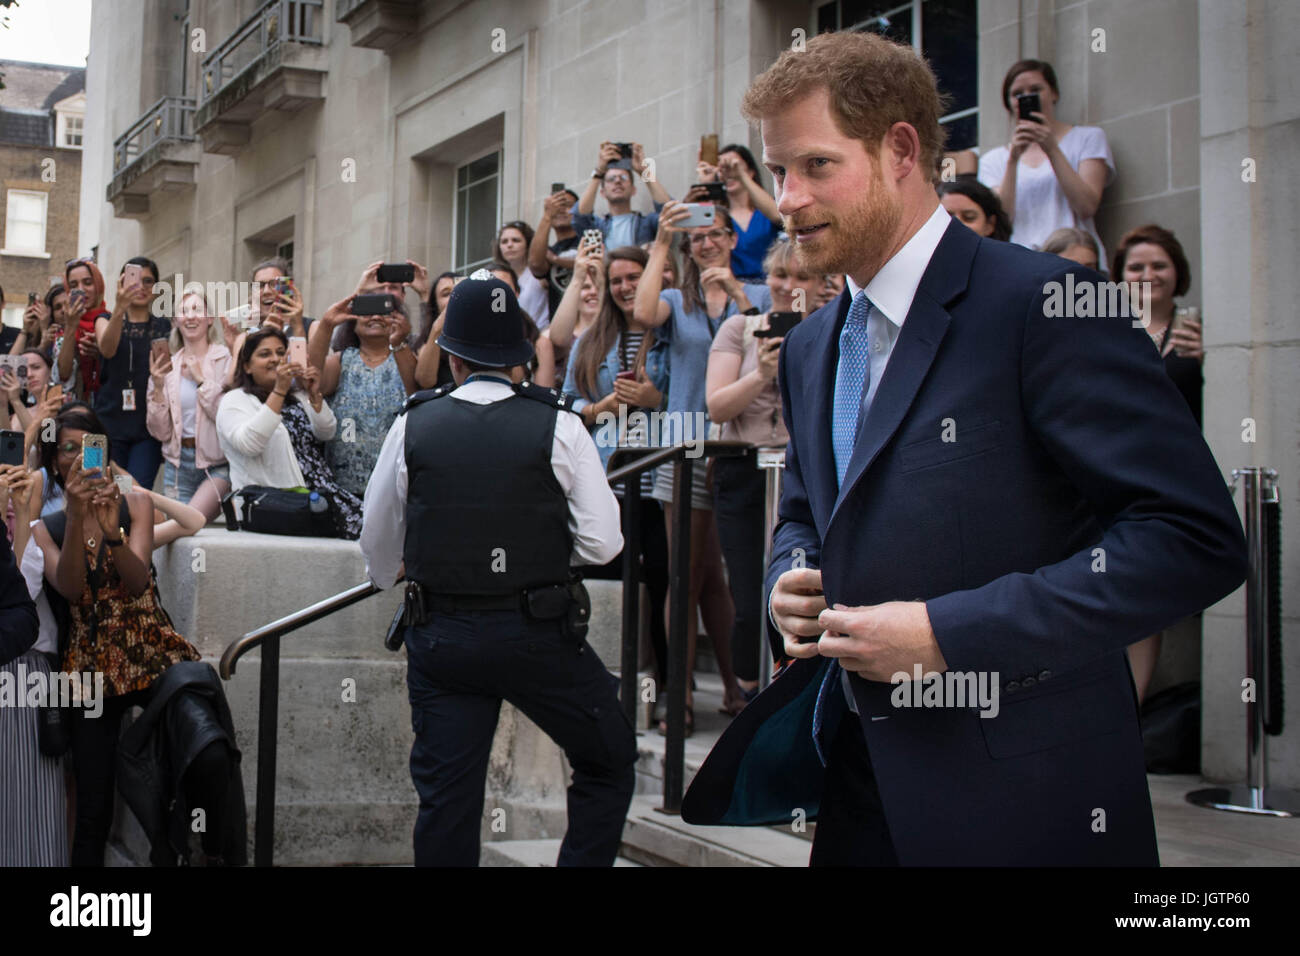 Prince Harry is photographed by members of the public as he leaves the London School of Hygiene and Tropical Medicine in Bloomsbury, London where he saw the work being undertaken to combat some of the world's most pressing health issues. Stock Photo